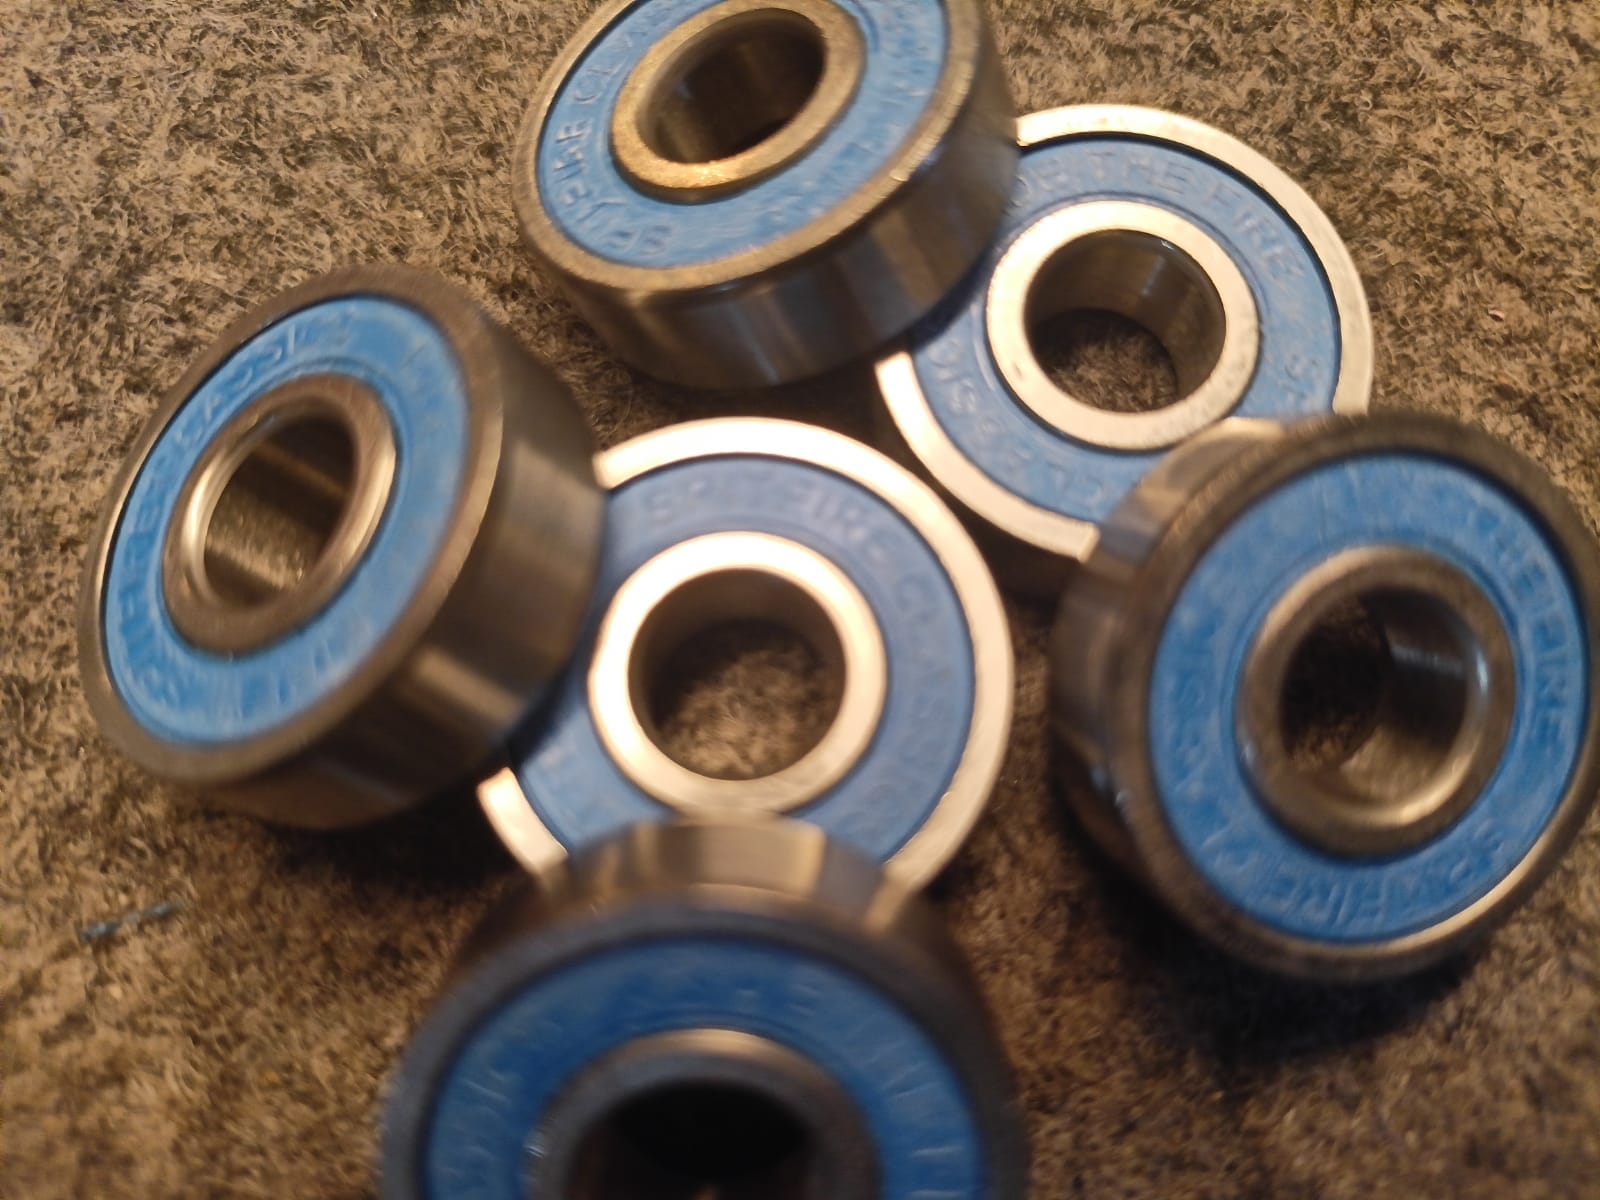 Bearings are available in various sizes, materials, and quality levels.